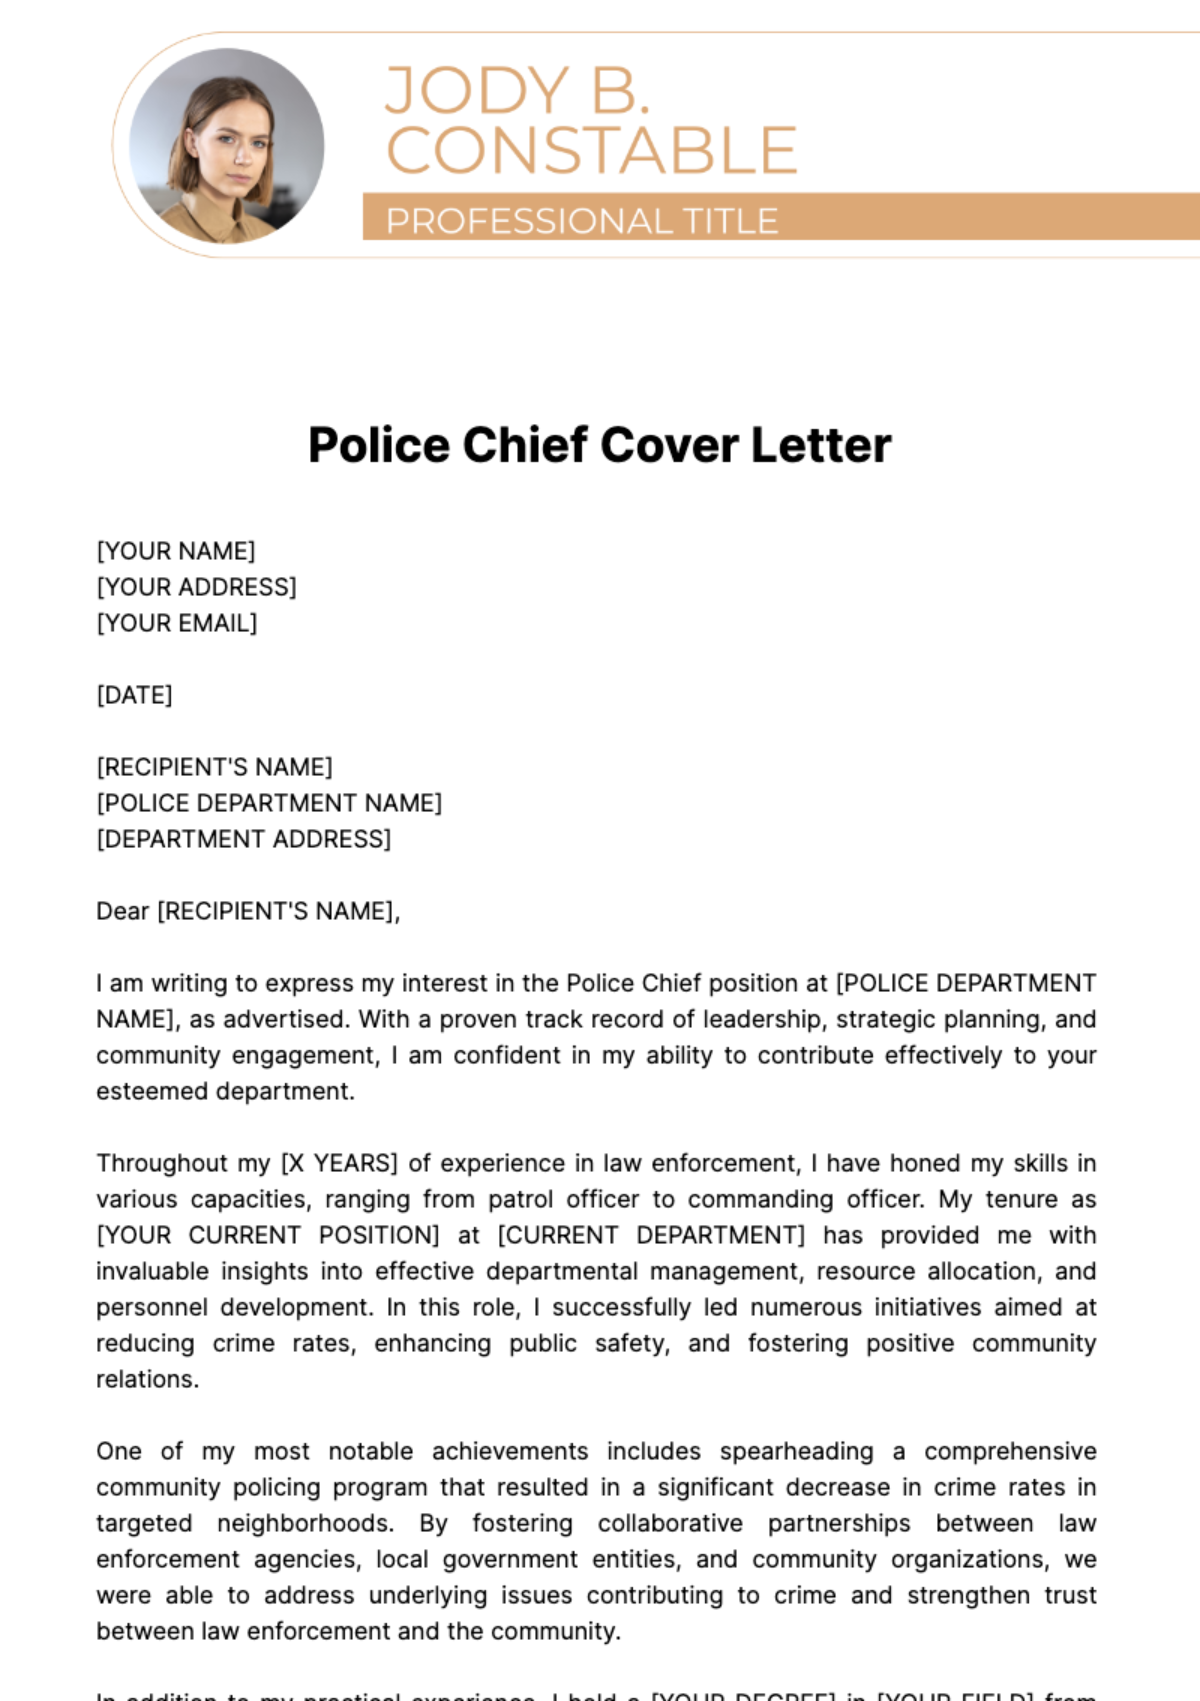 Police Chief Cover Letter Template